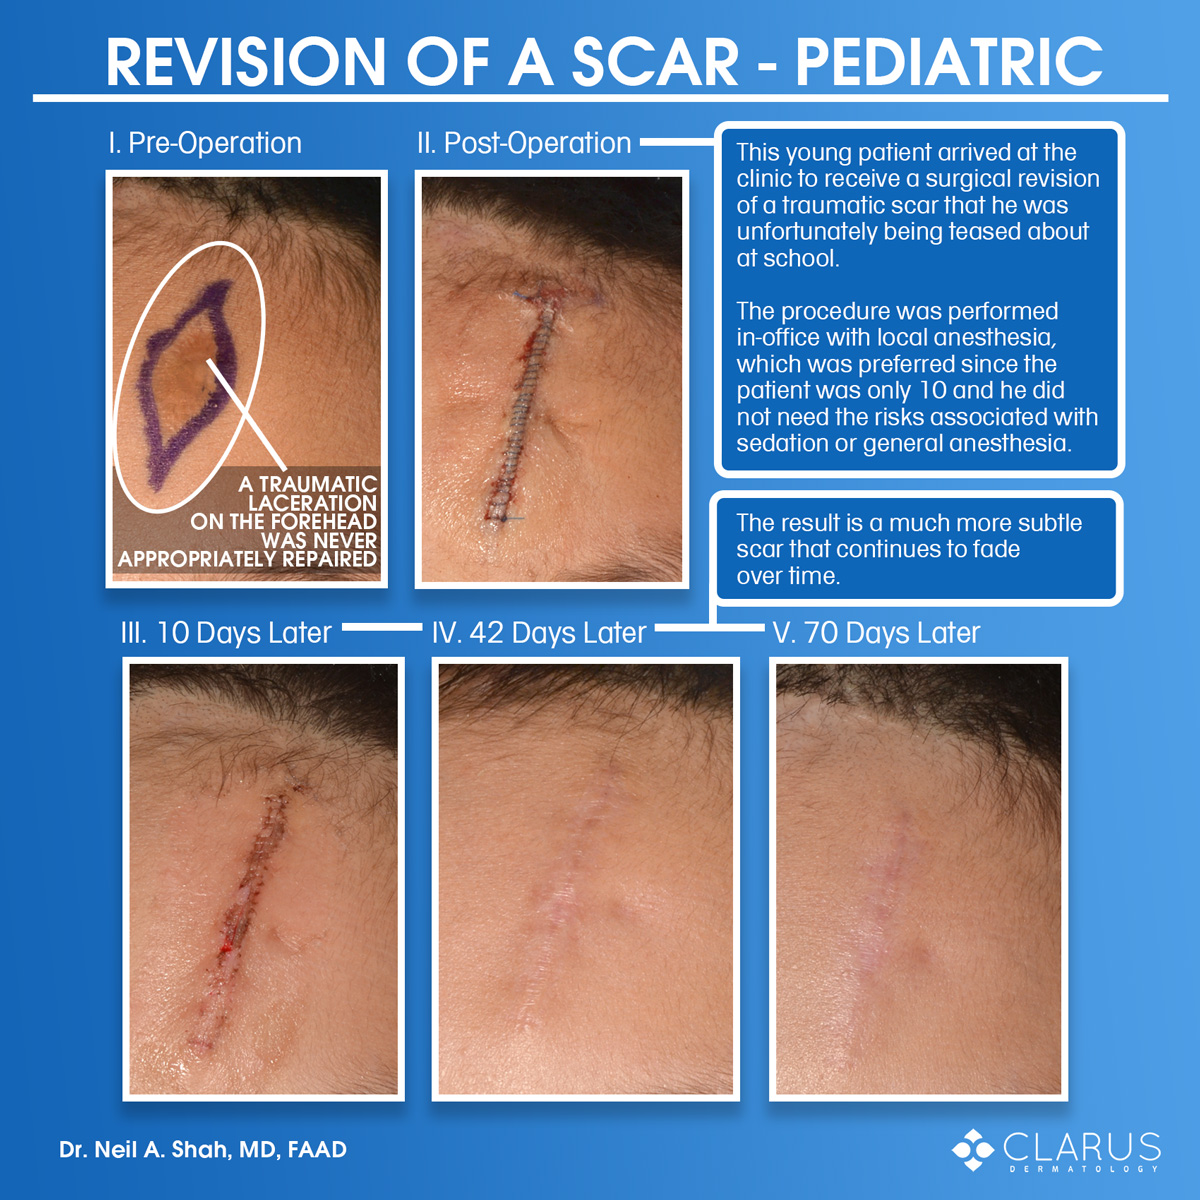 We recently saw a young patient here at Clarus Dermatology who needed to have a surgical revision of a traumatic scar.